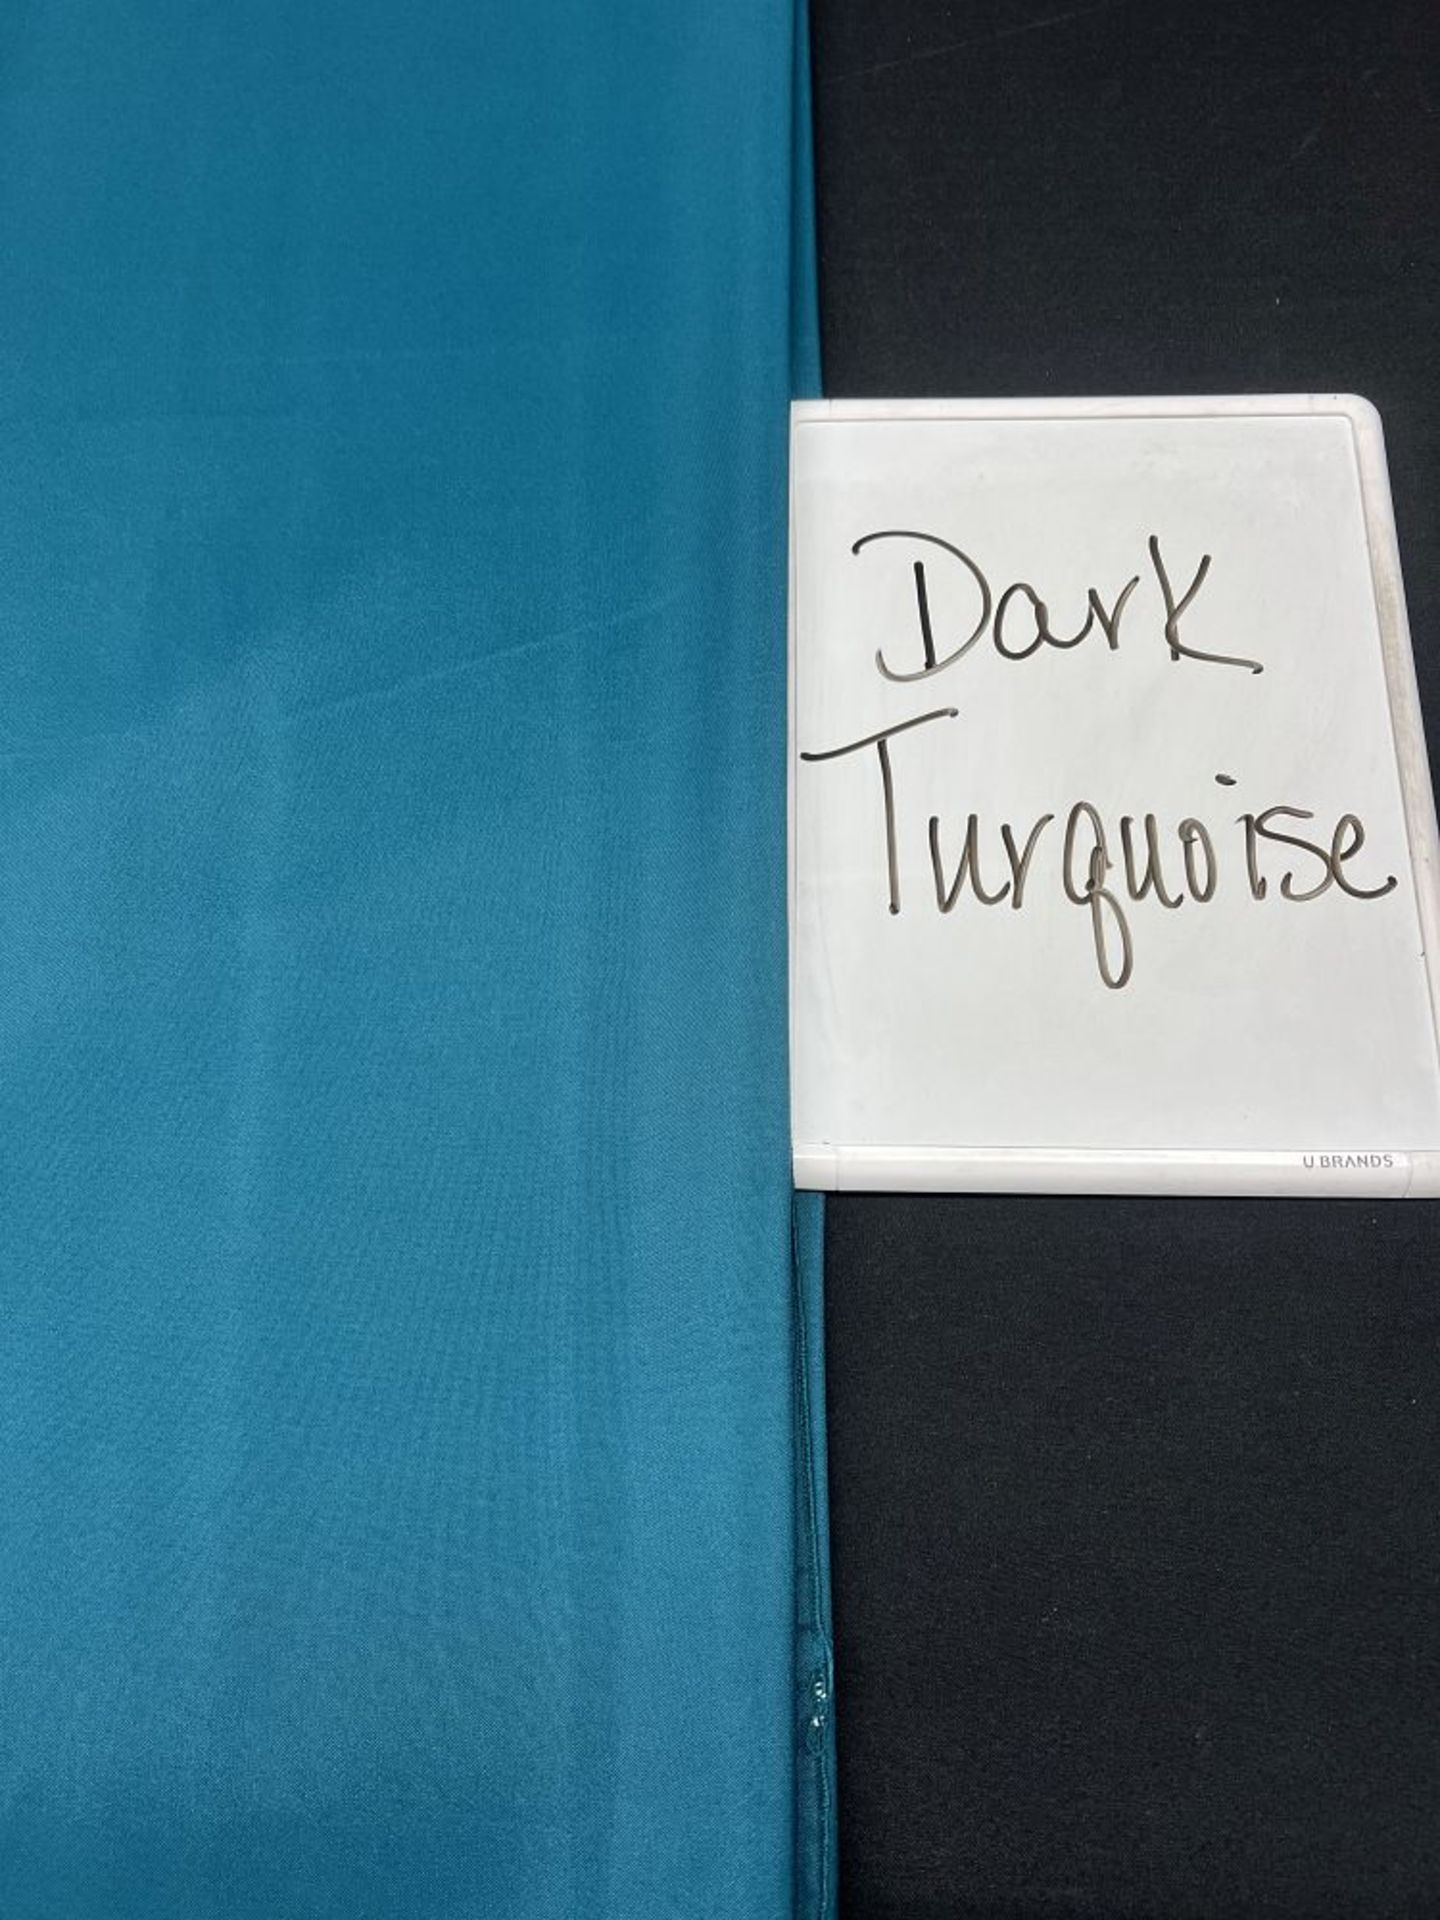 Dark Turquoise 60 x 120 Poly Tablecloth